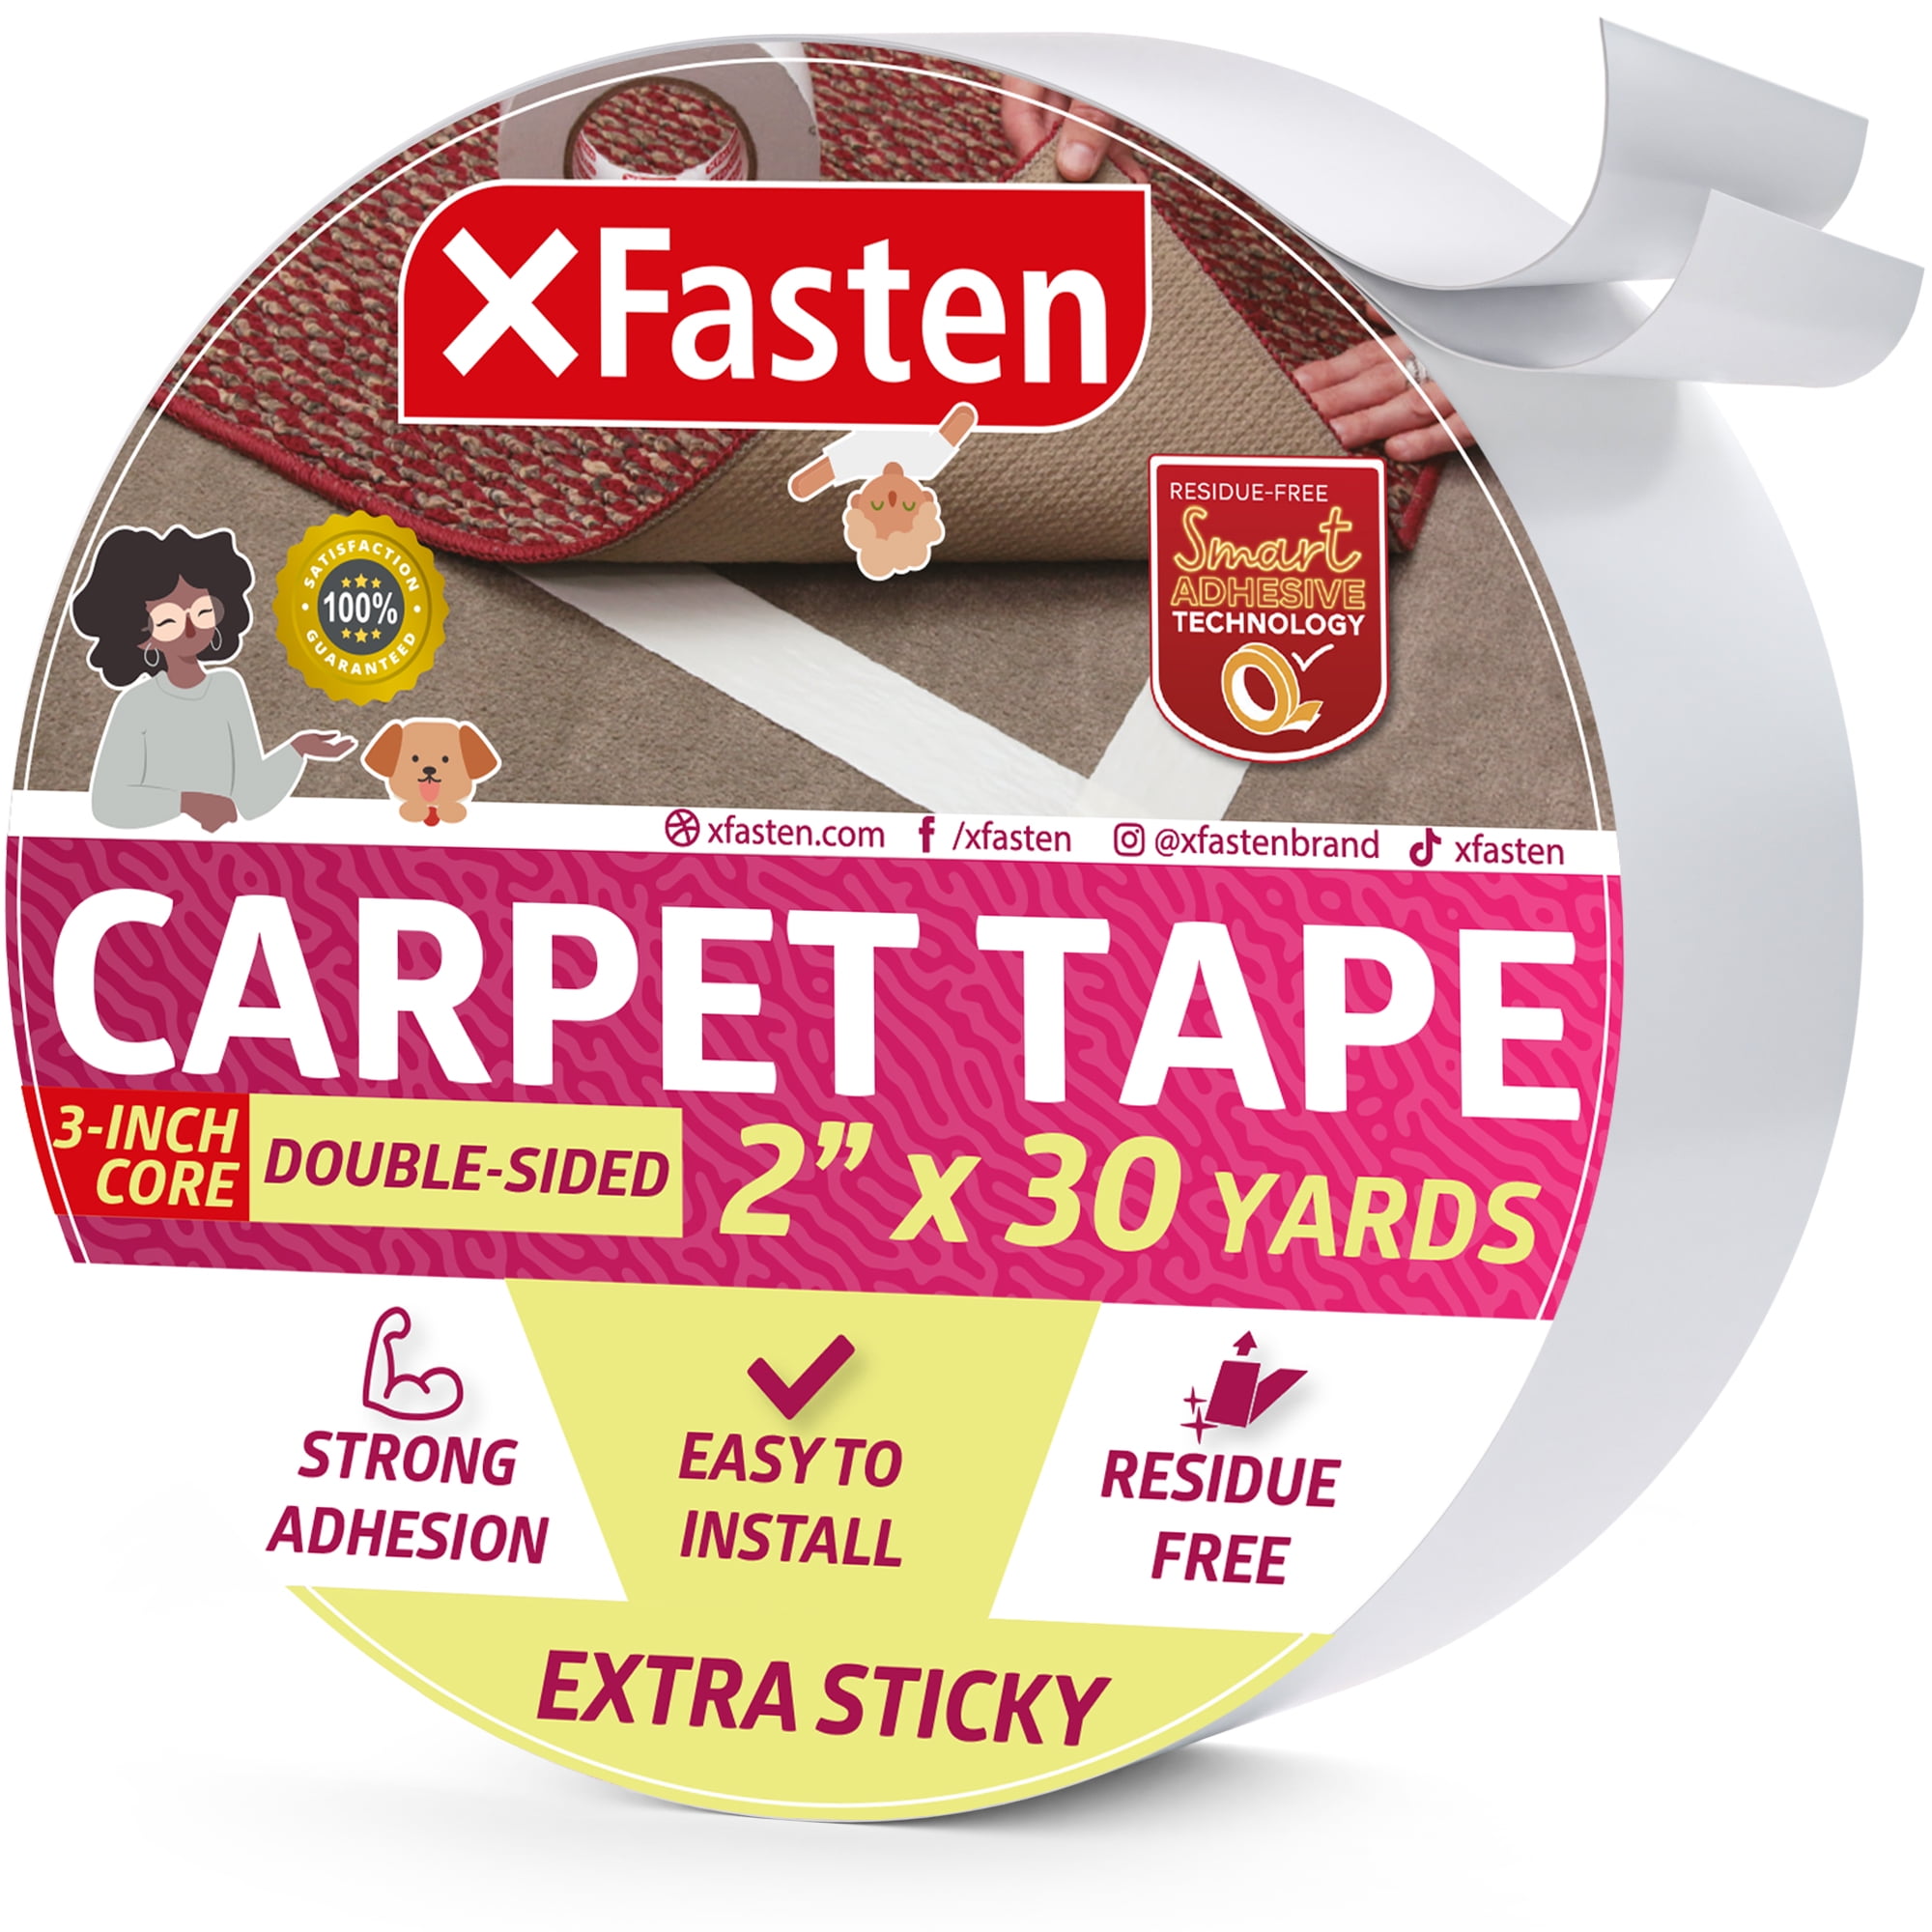 SafetyPro Carpet Tape 2''x 20 Yds Double Sided Carpet Tape Area Rugs Over  Carpet